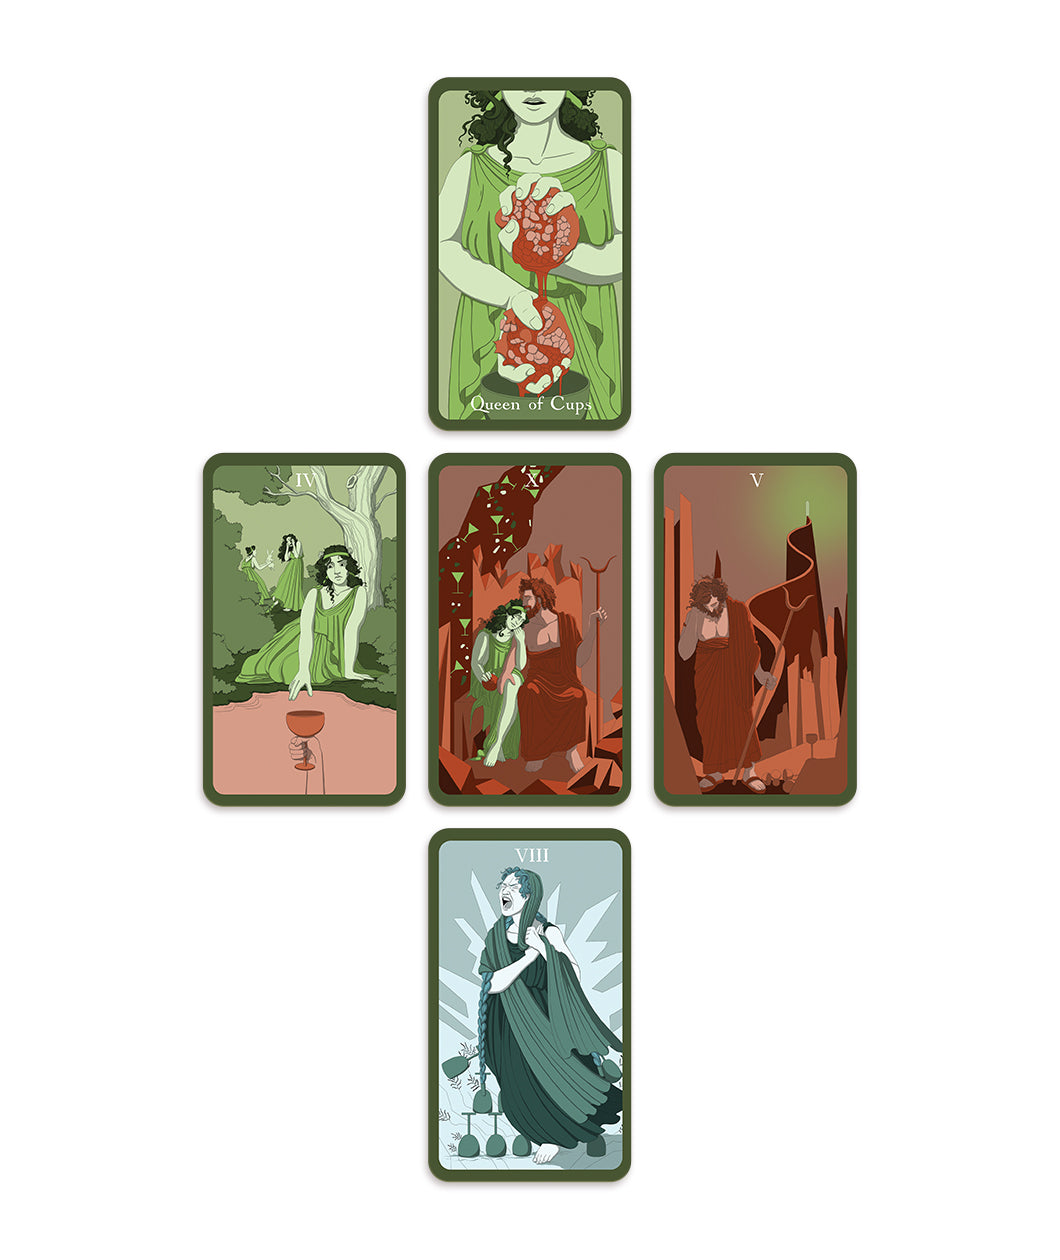 A grid of five illustrated tarot cards in green and brown color scheme, except one which is blue. This is the Cups Tarot booster from Spirits Podcast.